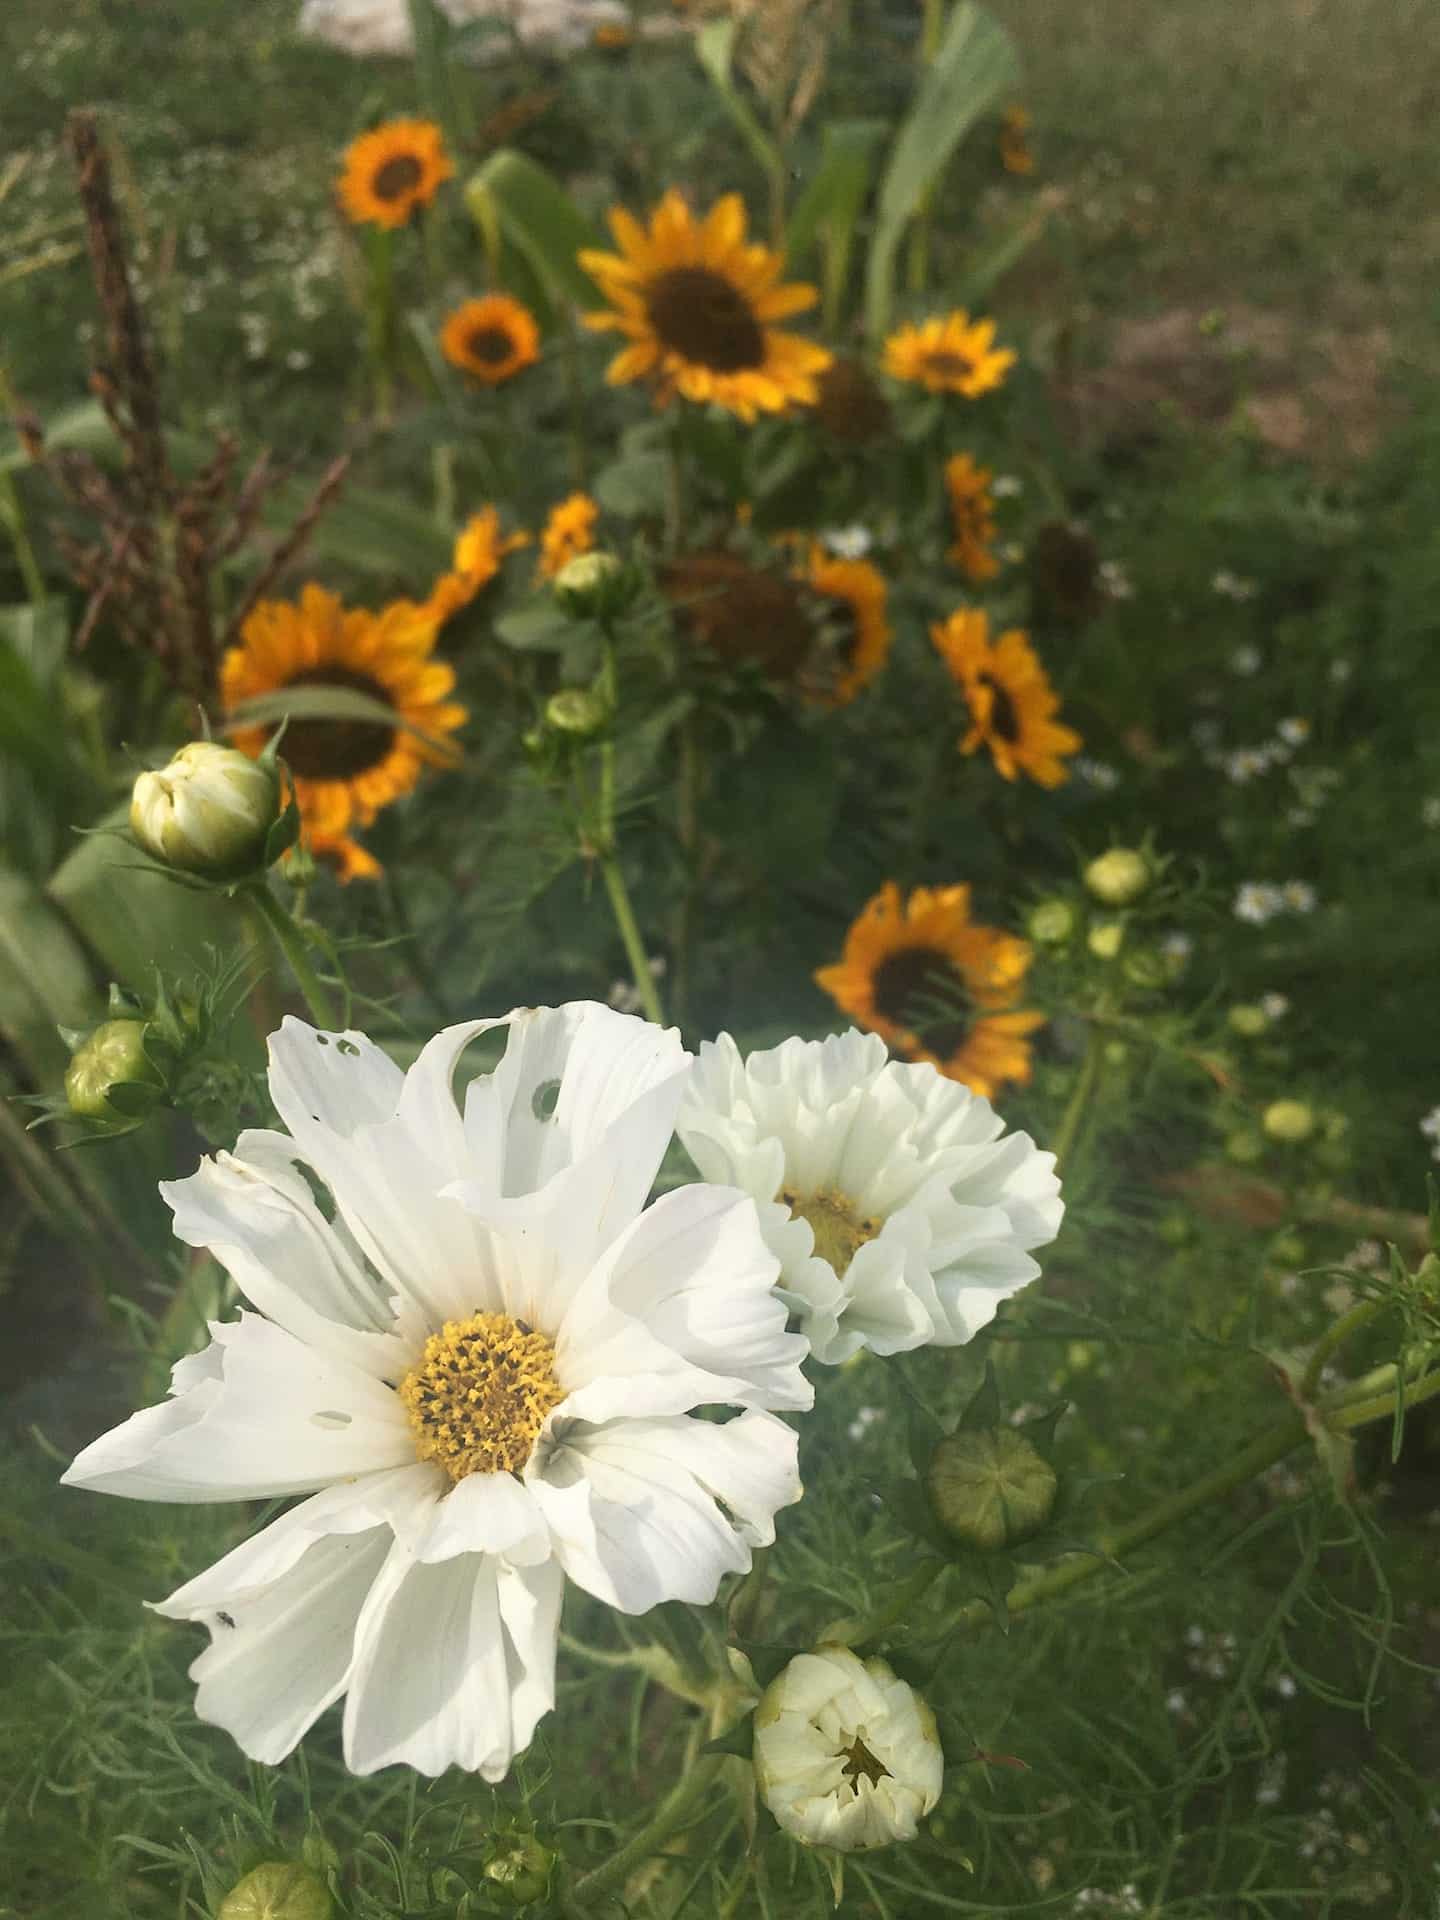 Sun and Cosmos Flowers